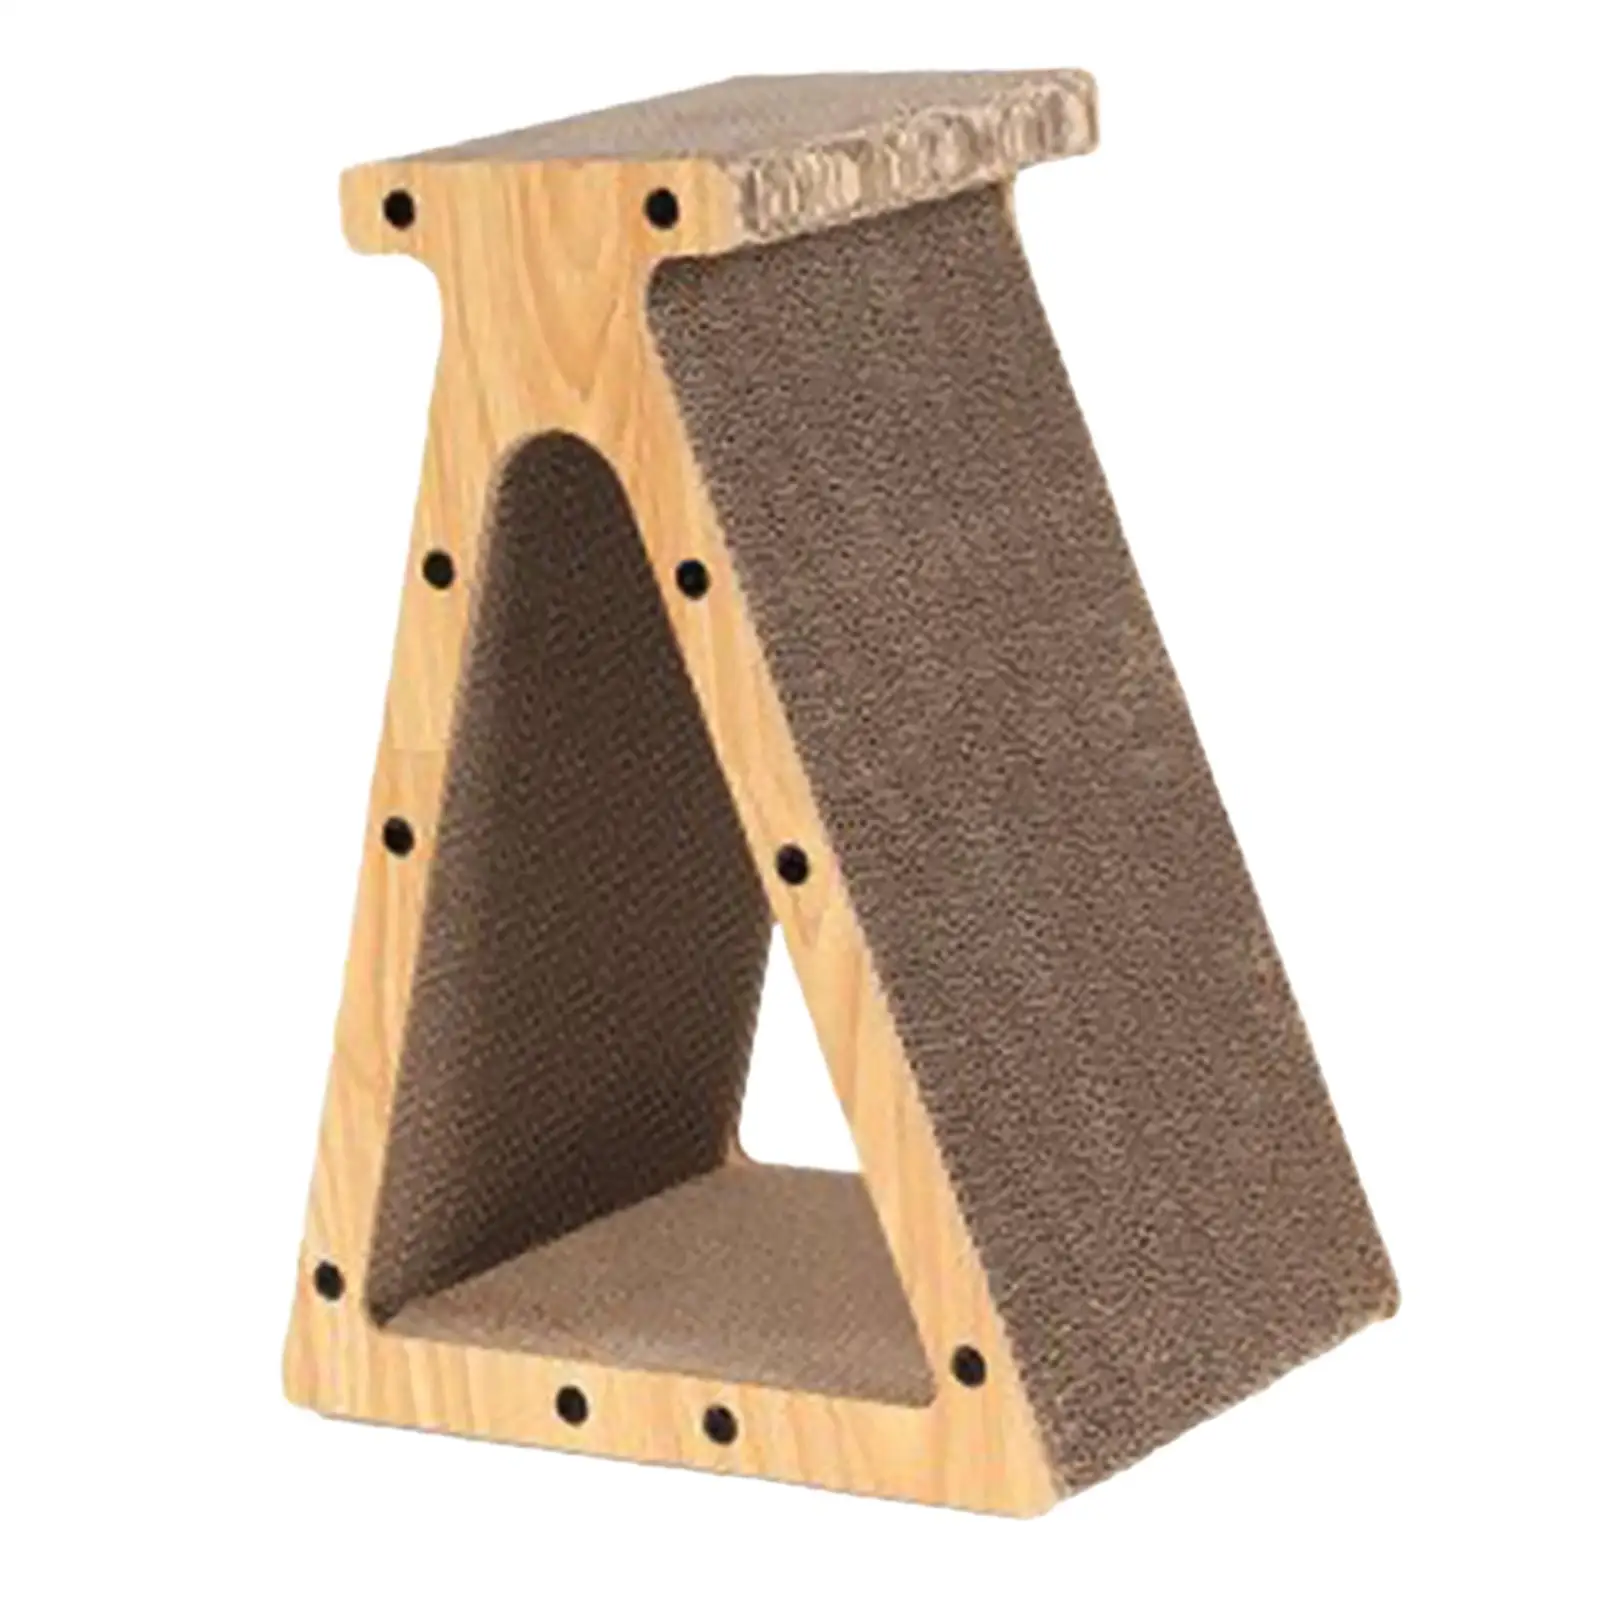 Cat Scratcher Cardboard Recycle Board Scratching Bed Scratching Toy Scratch Pad Corrugated Scratch Pad for Furniture Protector